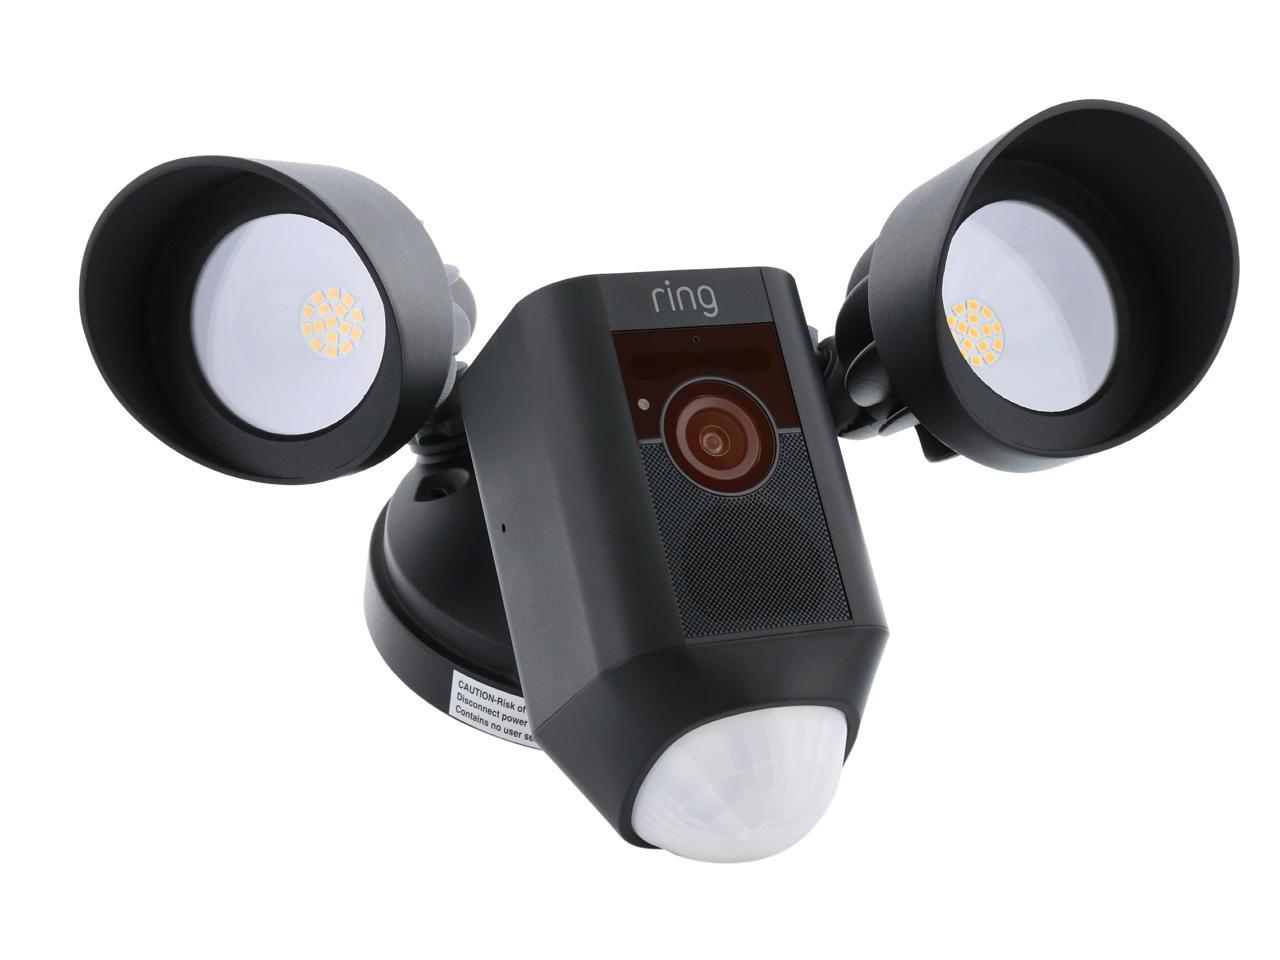 ring floodlight cam motion activated security camera